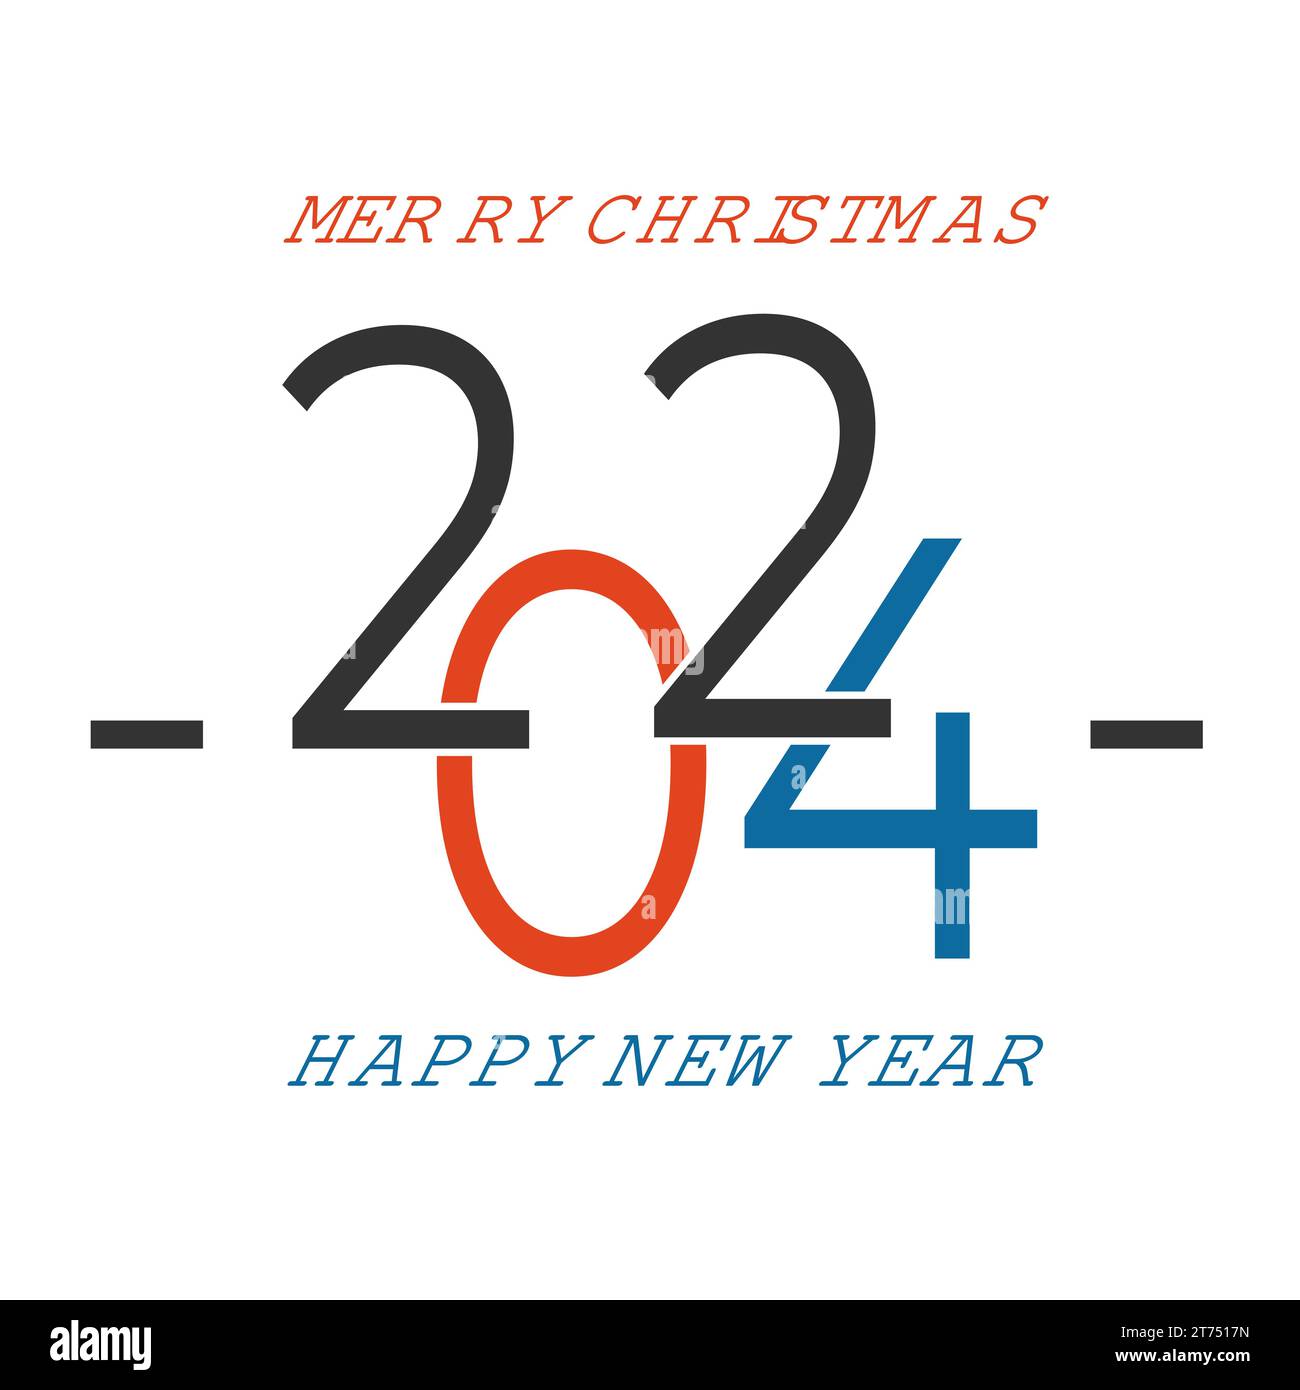 Merry Christmas,Happy New Year 2024 logo design. 2024 number design